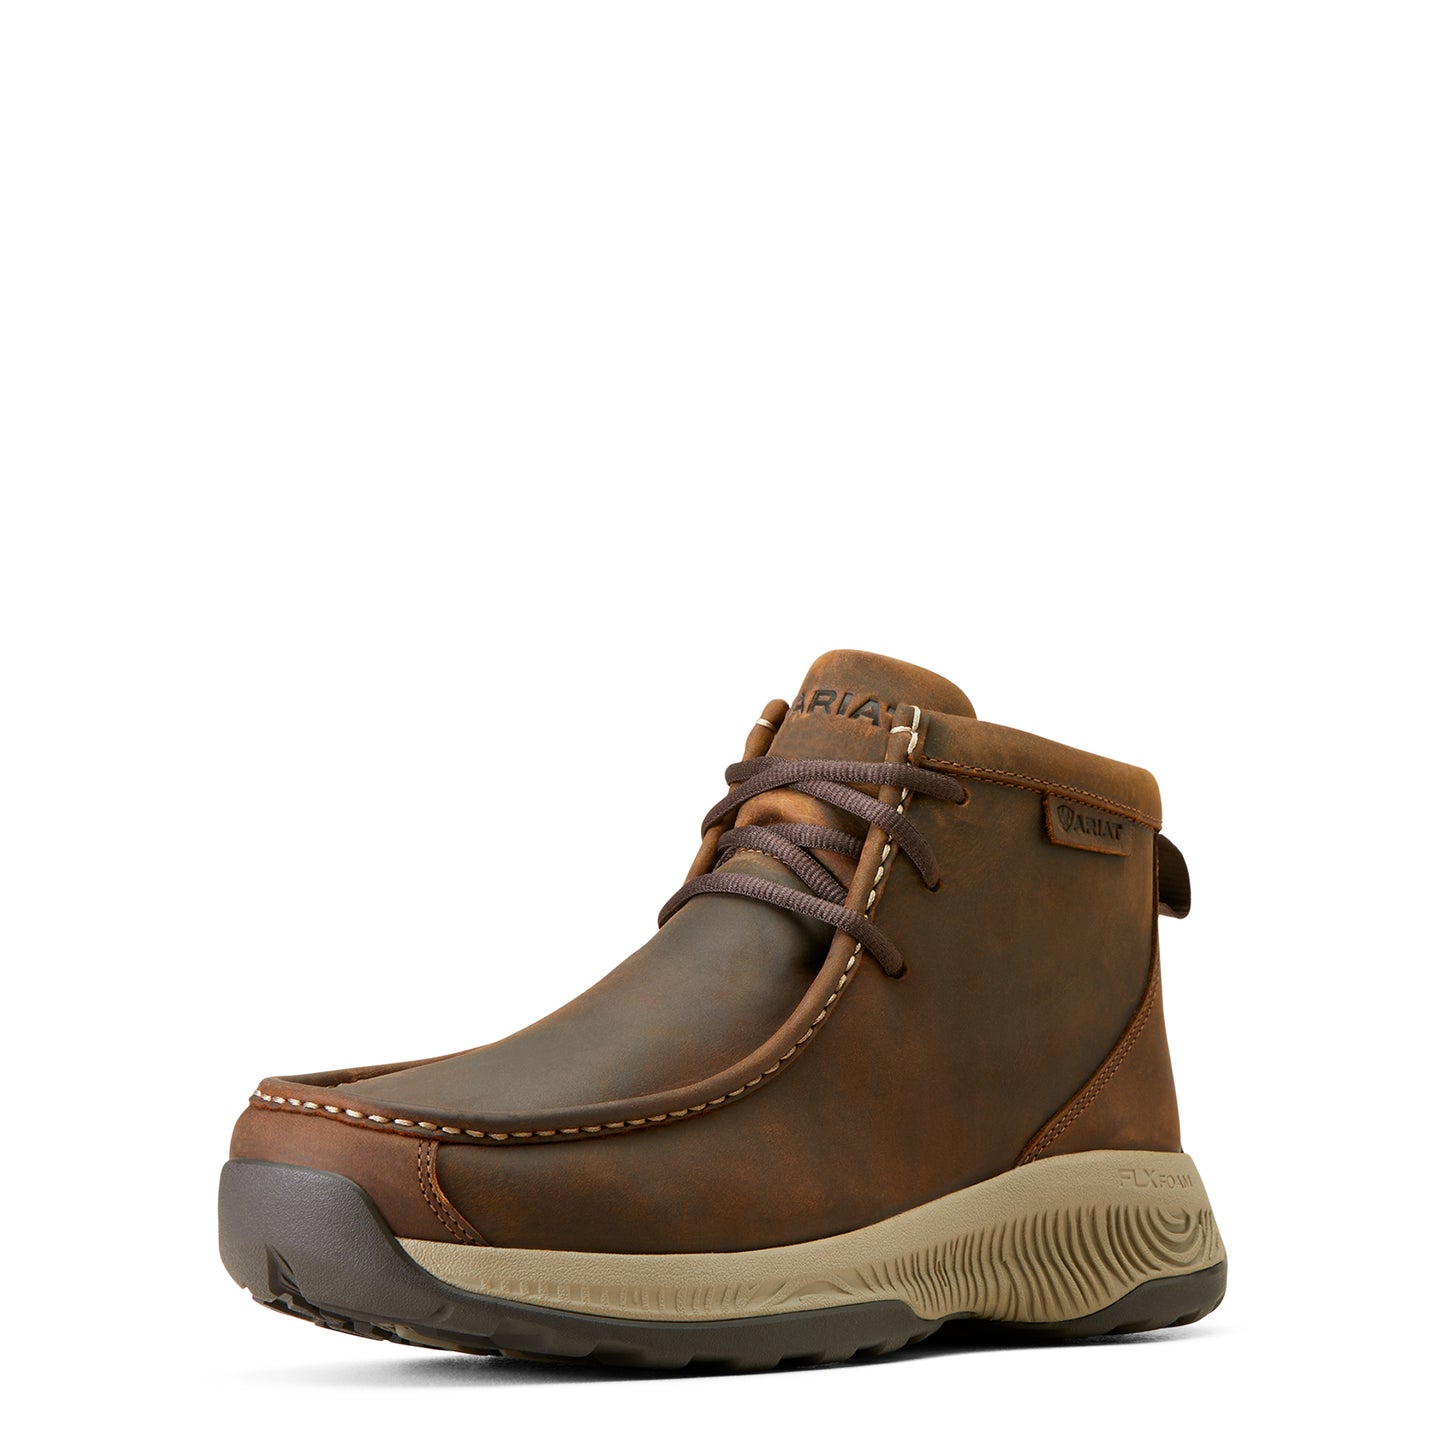 Mens Spitfire All Terrain- Oily Distressed Tan